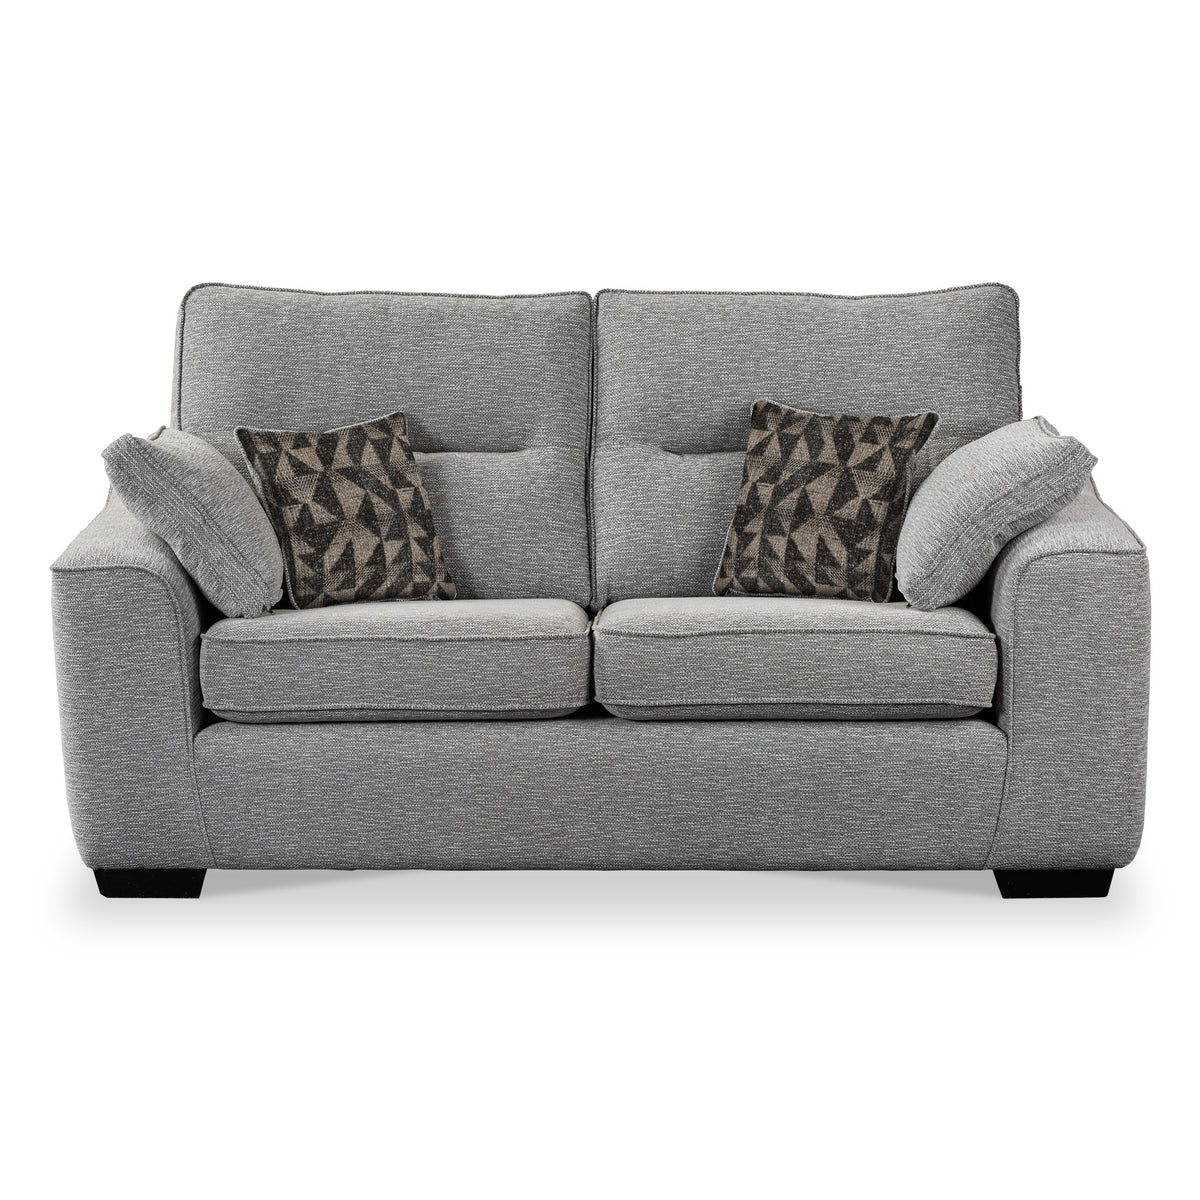 Sudbury Oatmeal 2 Seater Sofabed with Charcoal Scatter Cushions